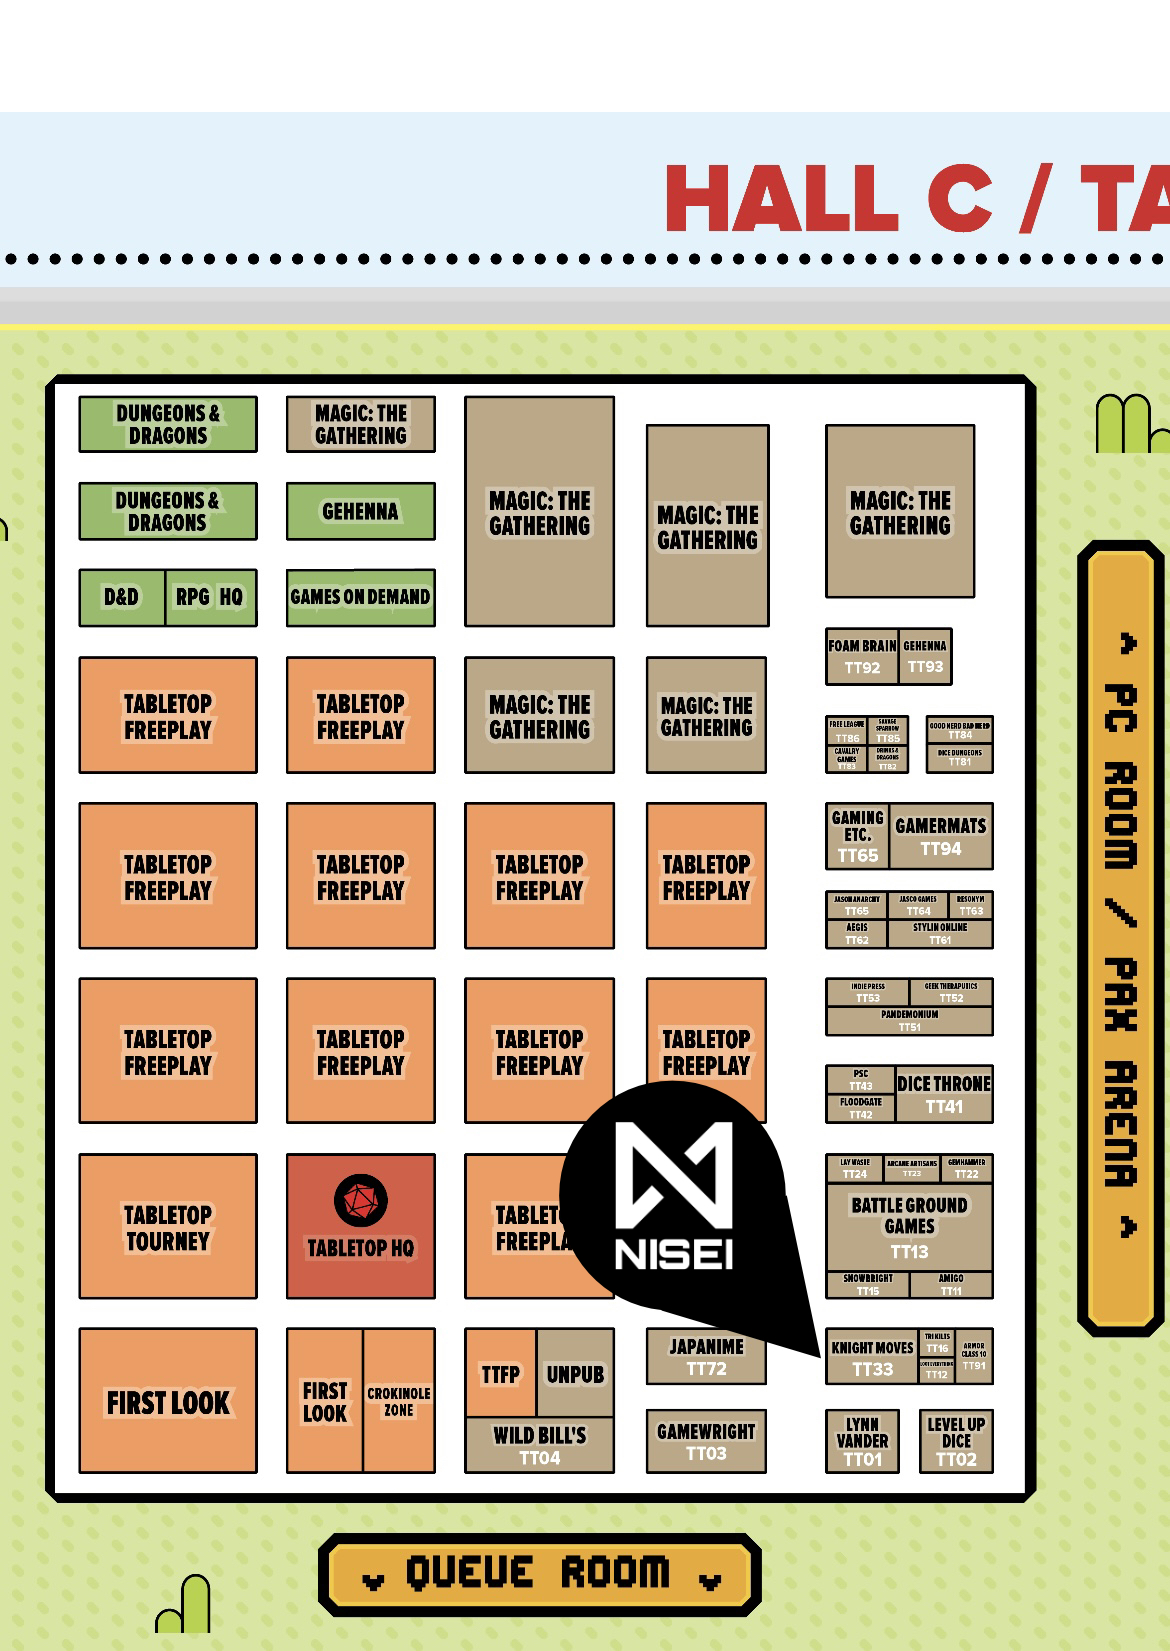 Map of Hall C, the Tabletop Room. NISEI is in the southeast corner, at booth TT33, Knight Moves.